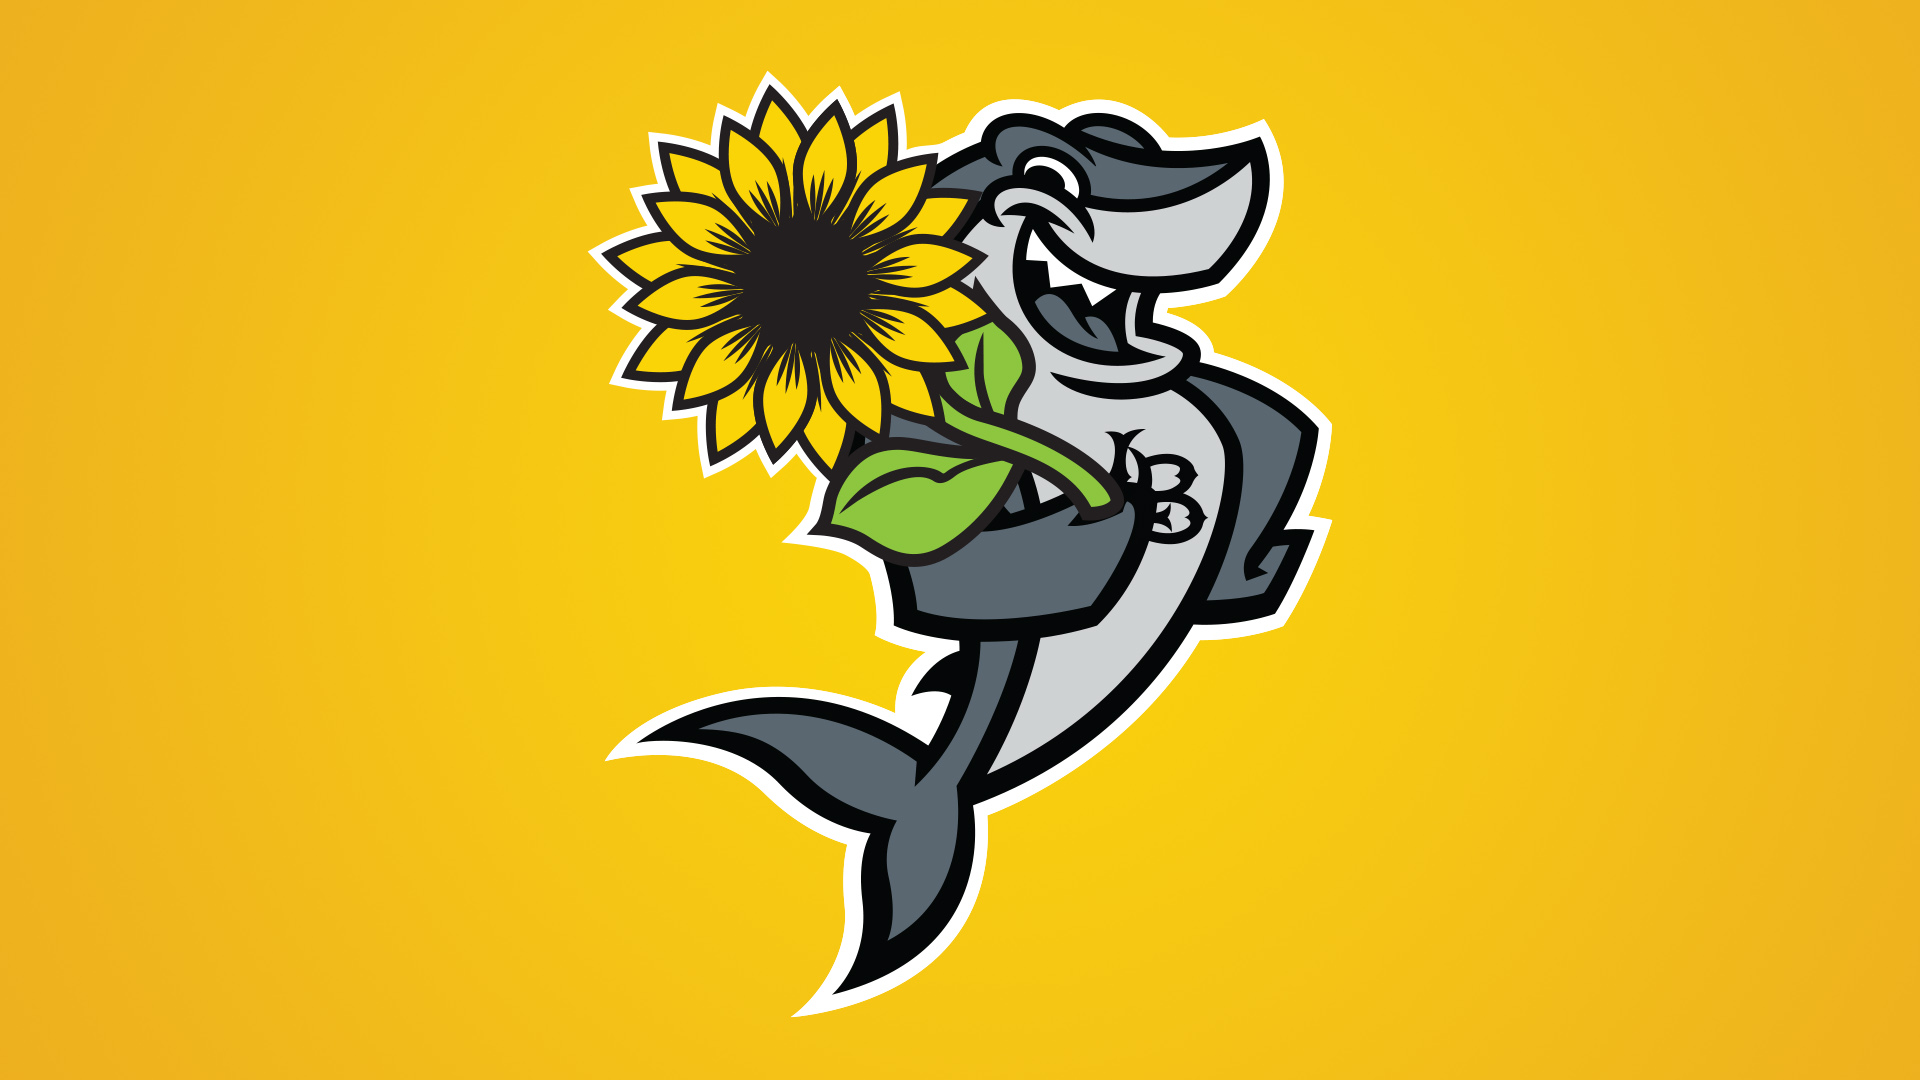 CSULB's mascot Elbee the Shark holds a sunflower. The sunflower symbol allows students, staff and faculty to identify an individual with a hidden disability who would benefit from understanding, inclusivity and support.